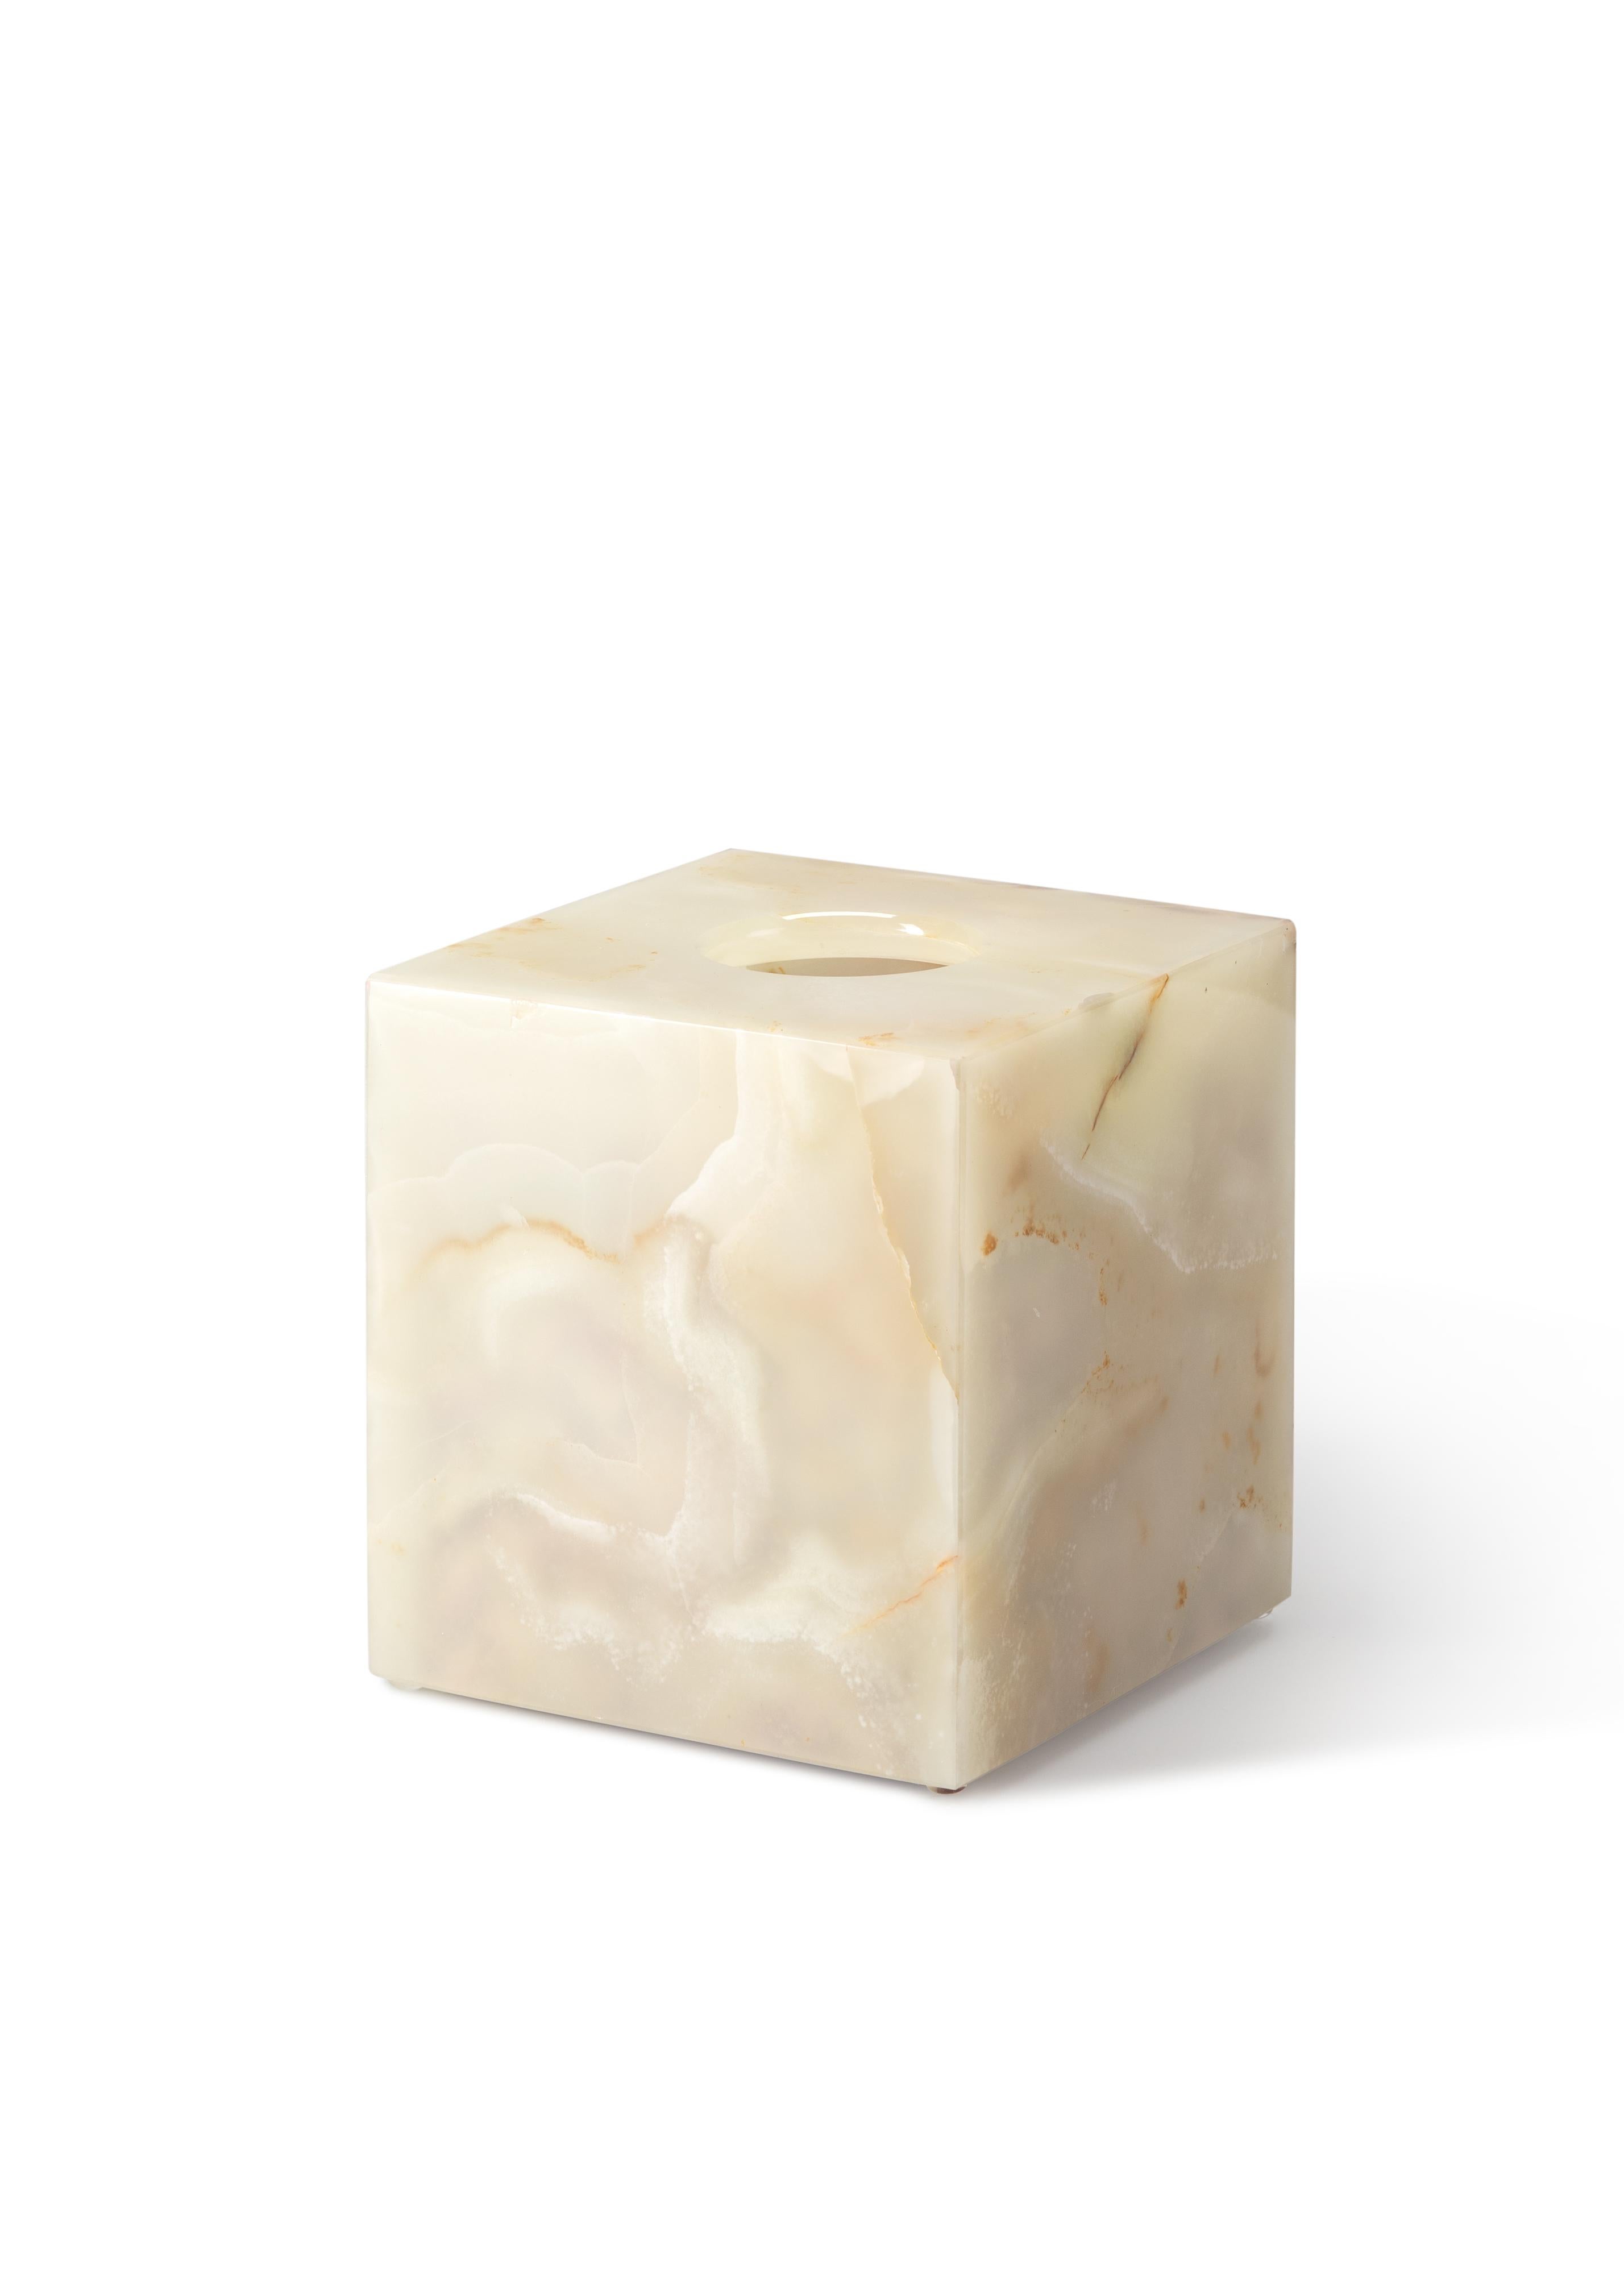 Crafted entirely by hand, this onyx tissue box cover is a fusion of form and function, seamlessly blending into any space while adding sophistication and elegance. Clean, minimalist lines highlight the natural veining of the marble, making each